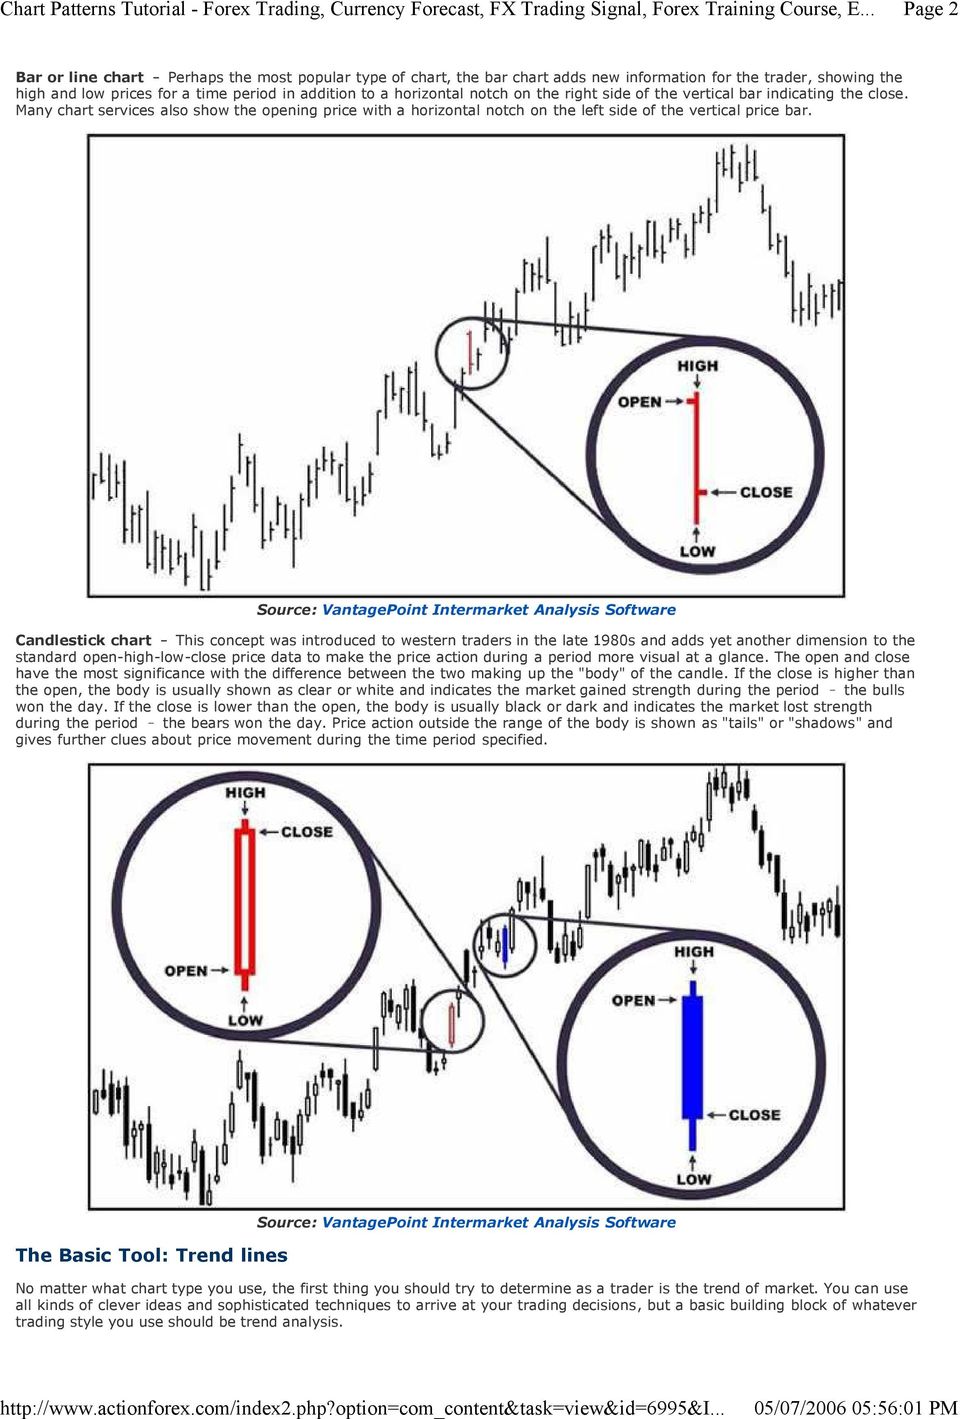 Candlestick chart This concept was introduced to western traders in the late 1980s and adds yet another dimension to the standard open-high-low-close price data to make the price action during a